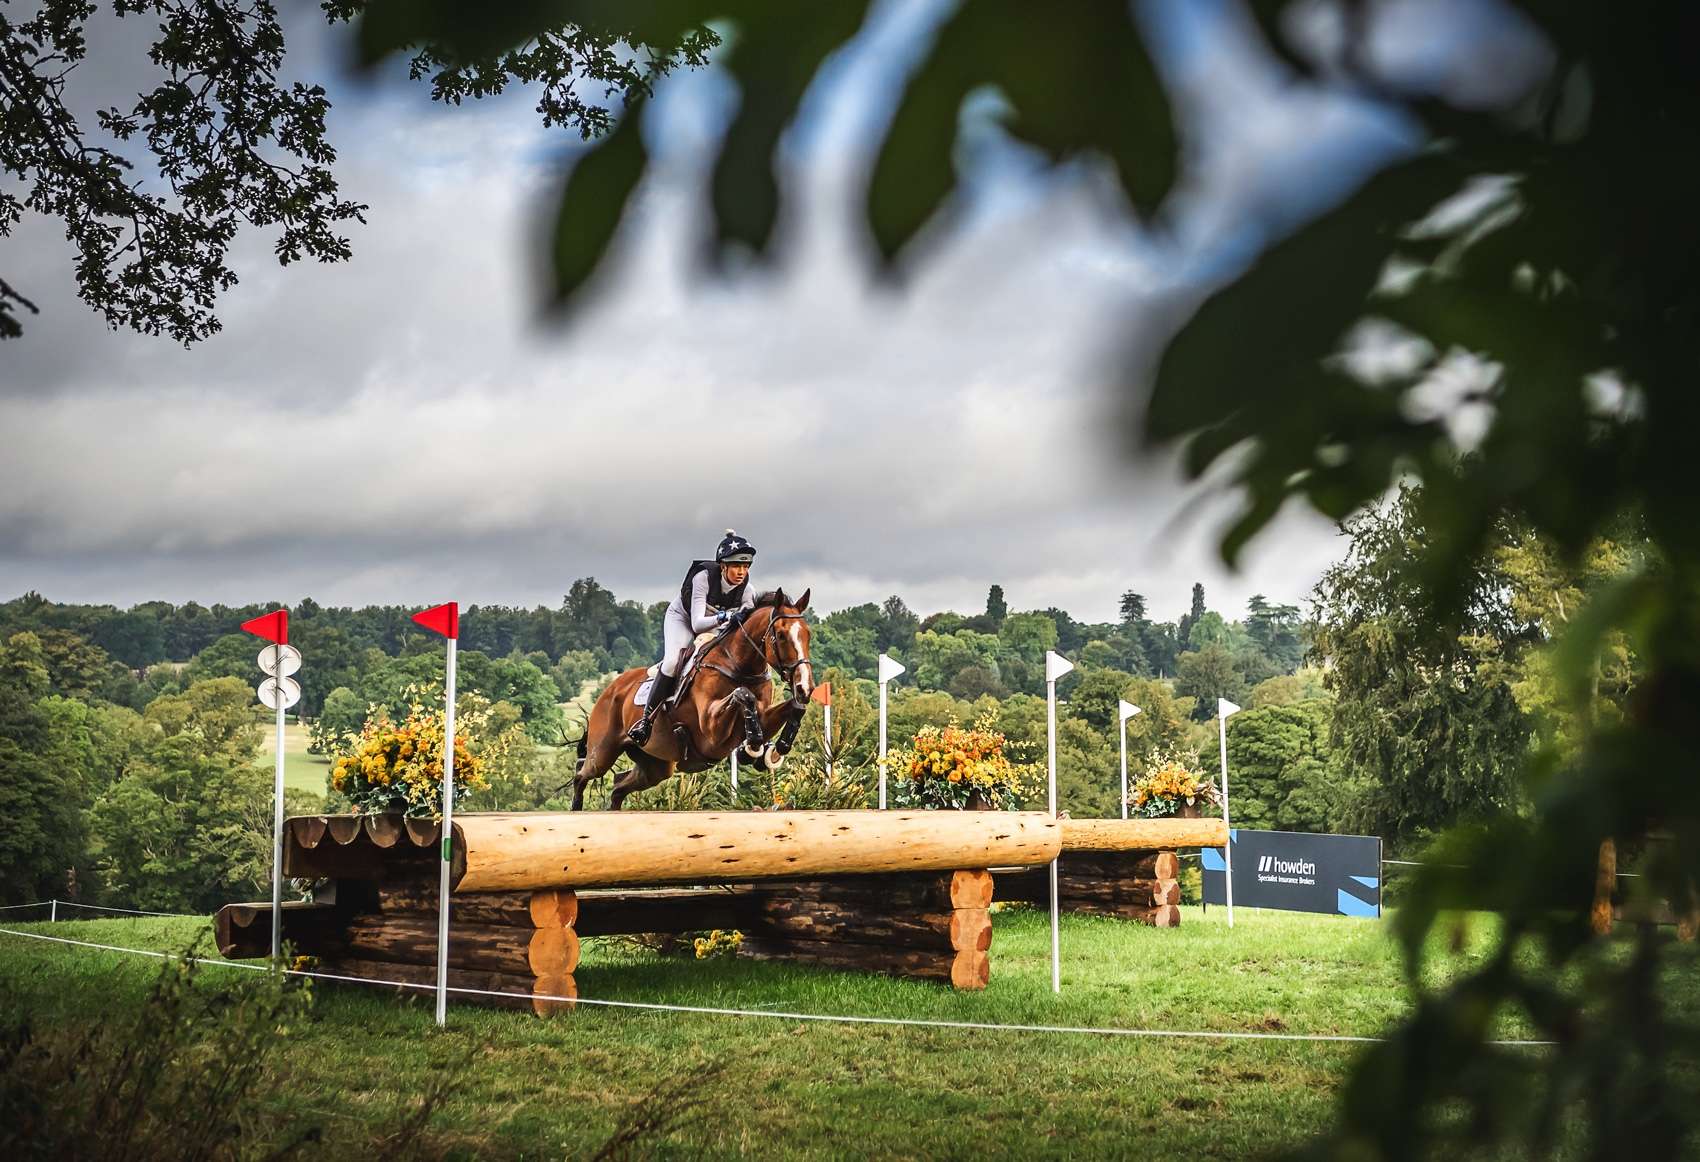 Cornbury House Horse Trials cross country course image of a rider jumping a log fence